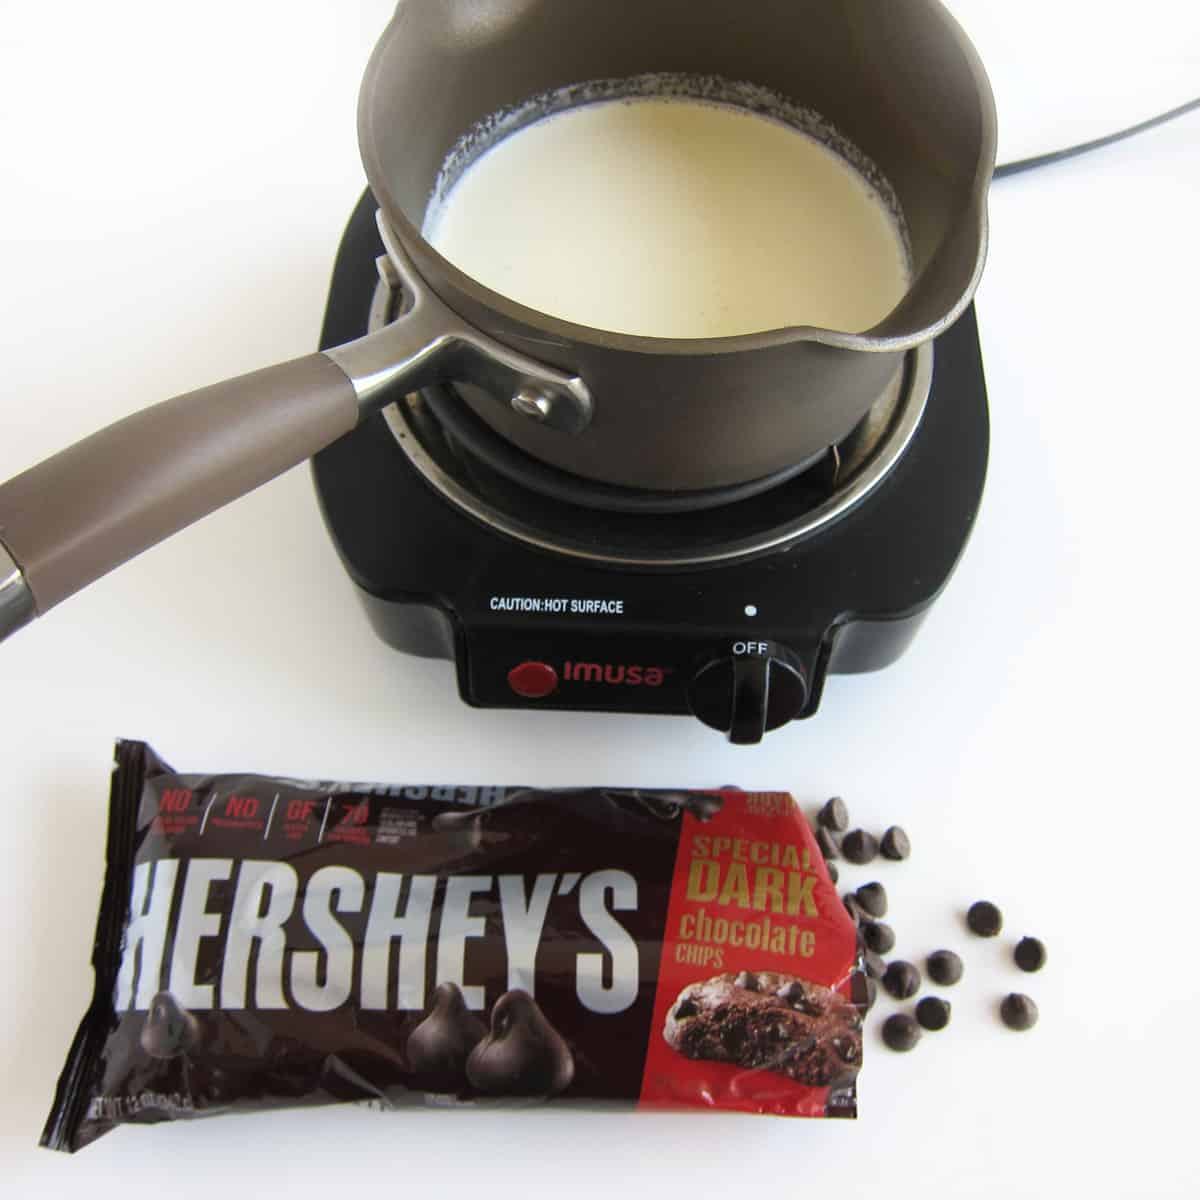 bag of Hershey's Special Dark Chocolate chips in front of a saucepan of heavy cream